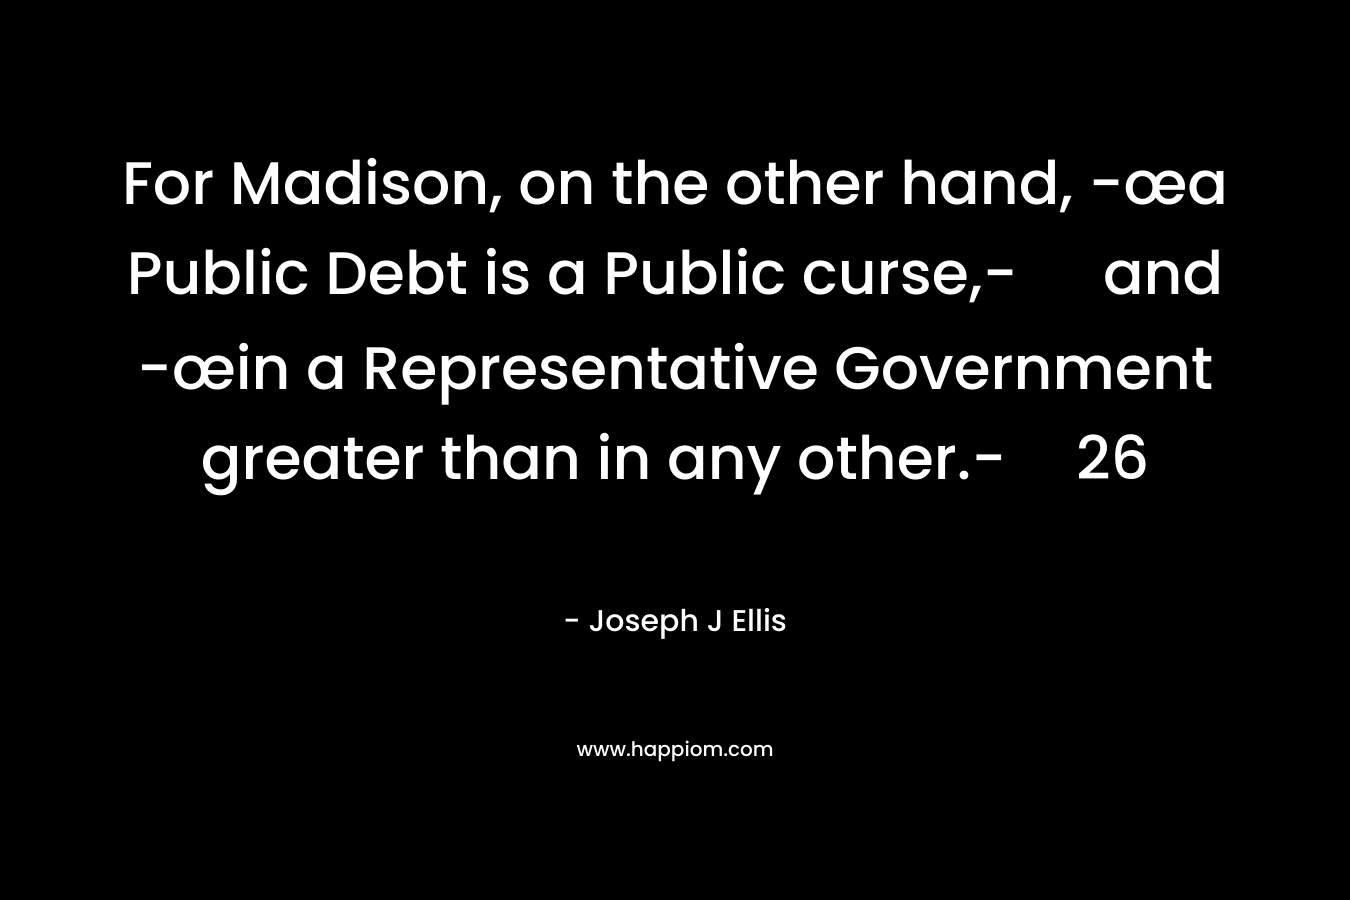 For Madison, on the other hand, -œa Public Debt is a Public curse,- and -œin a Representative Government greater than in any other.-26 – Joseph J Ellis